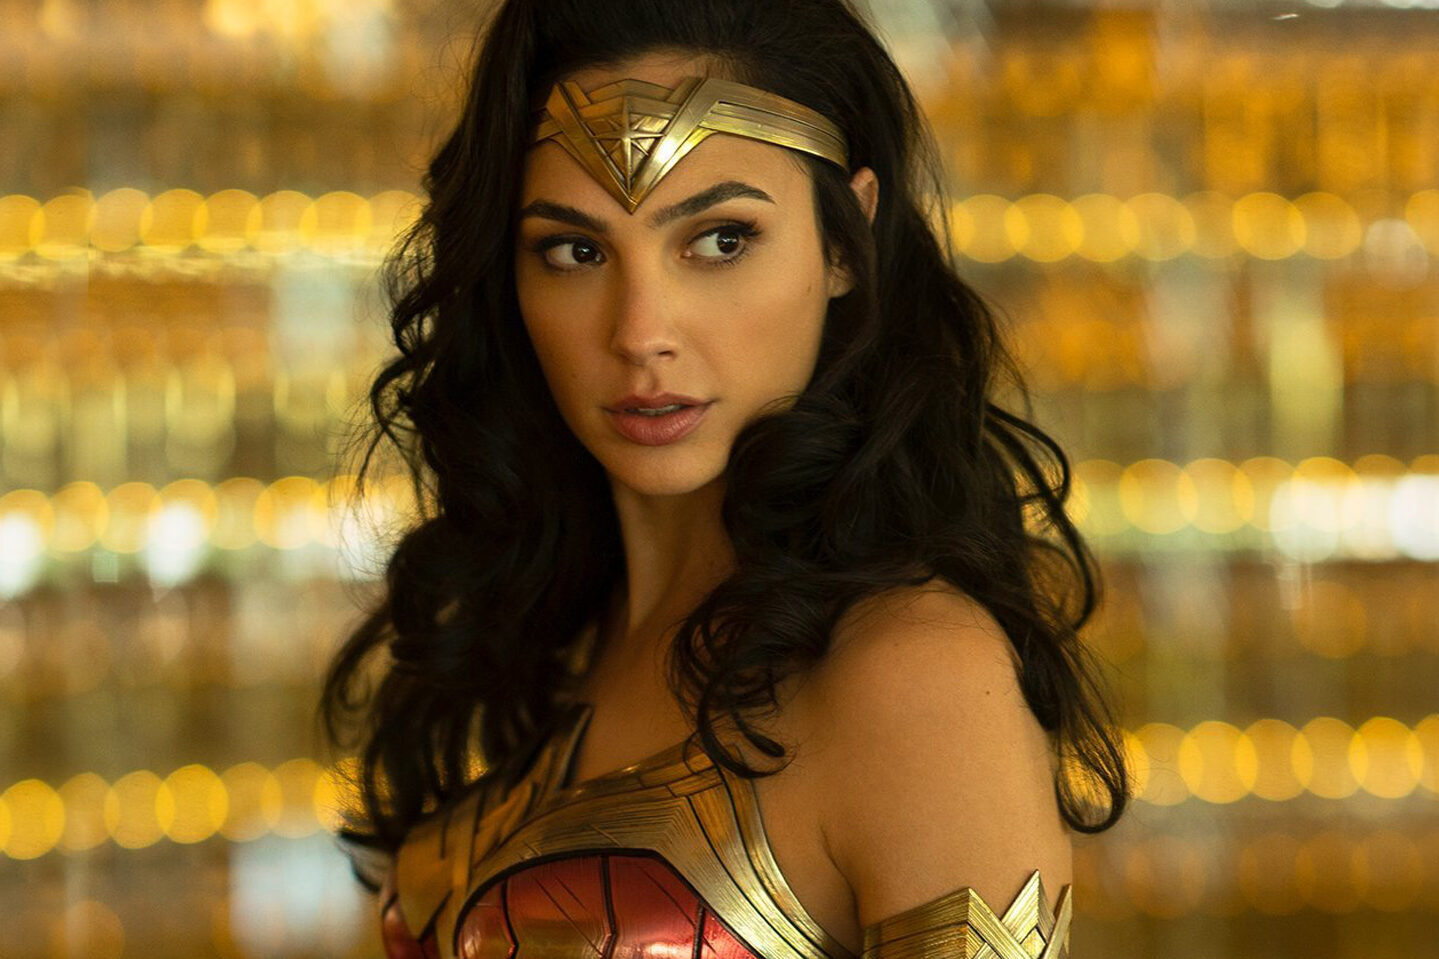 Wonder Woman 1984 is now the lowest-rated DCEU film on IMDB